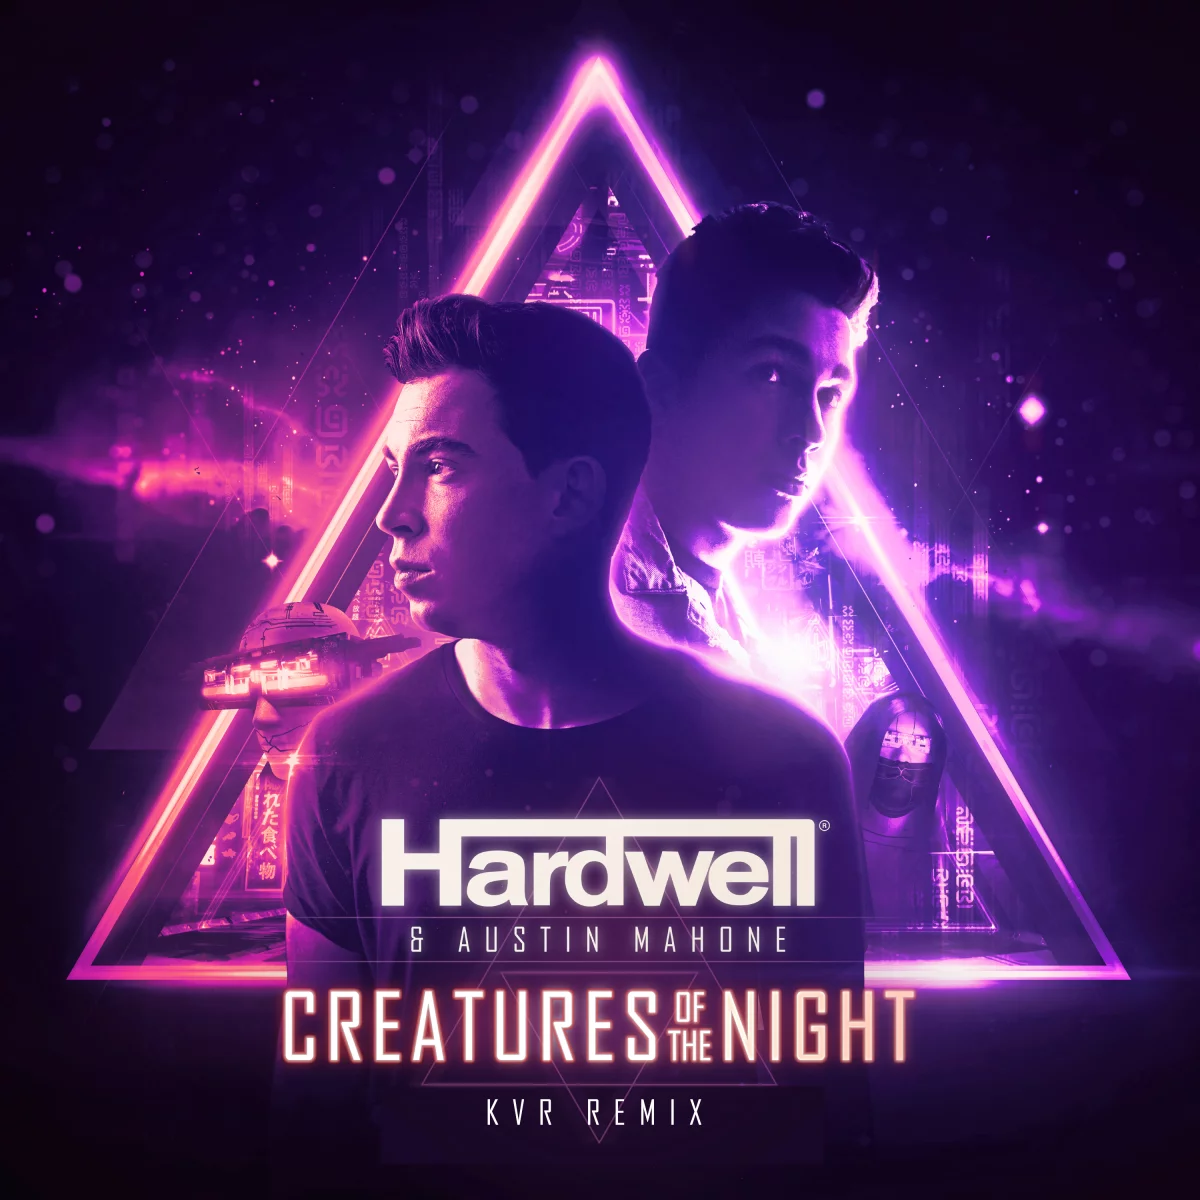 Creatures Of The Night (KVR Remix) - Hardwell⁠ 